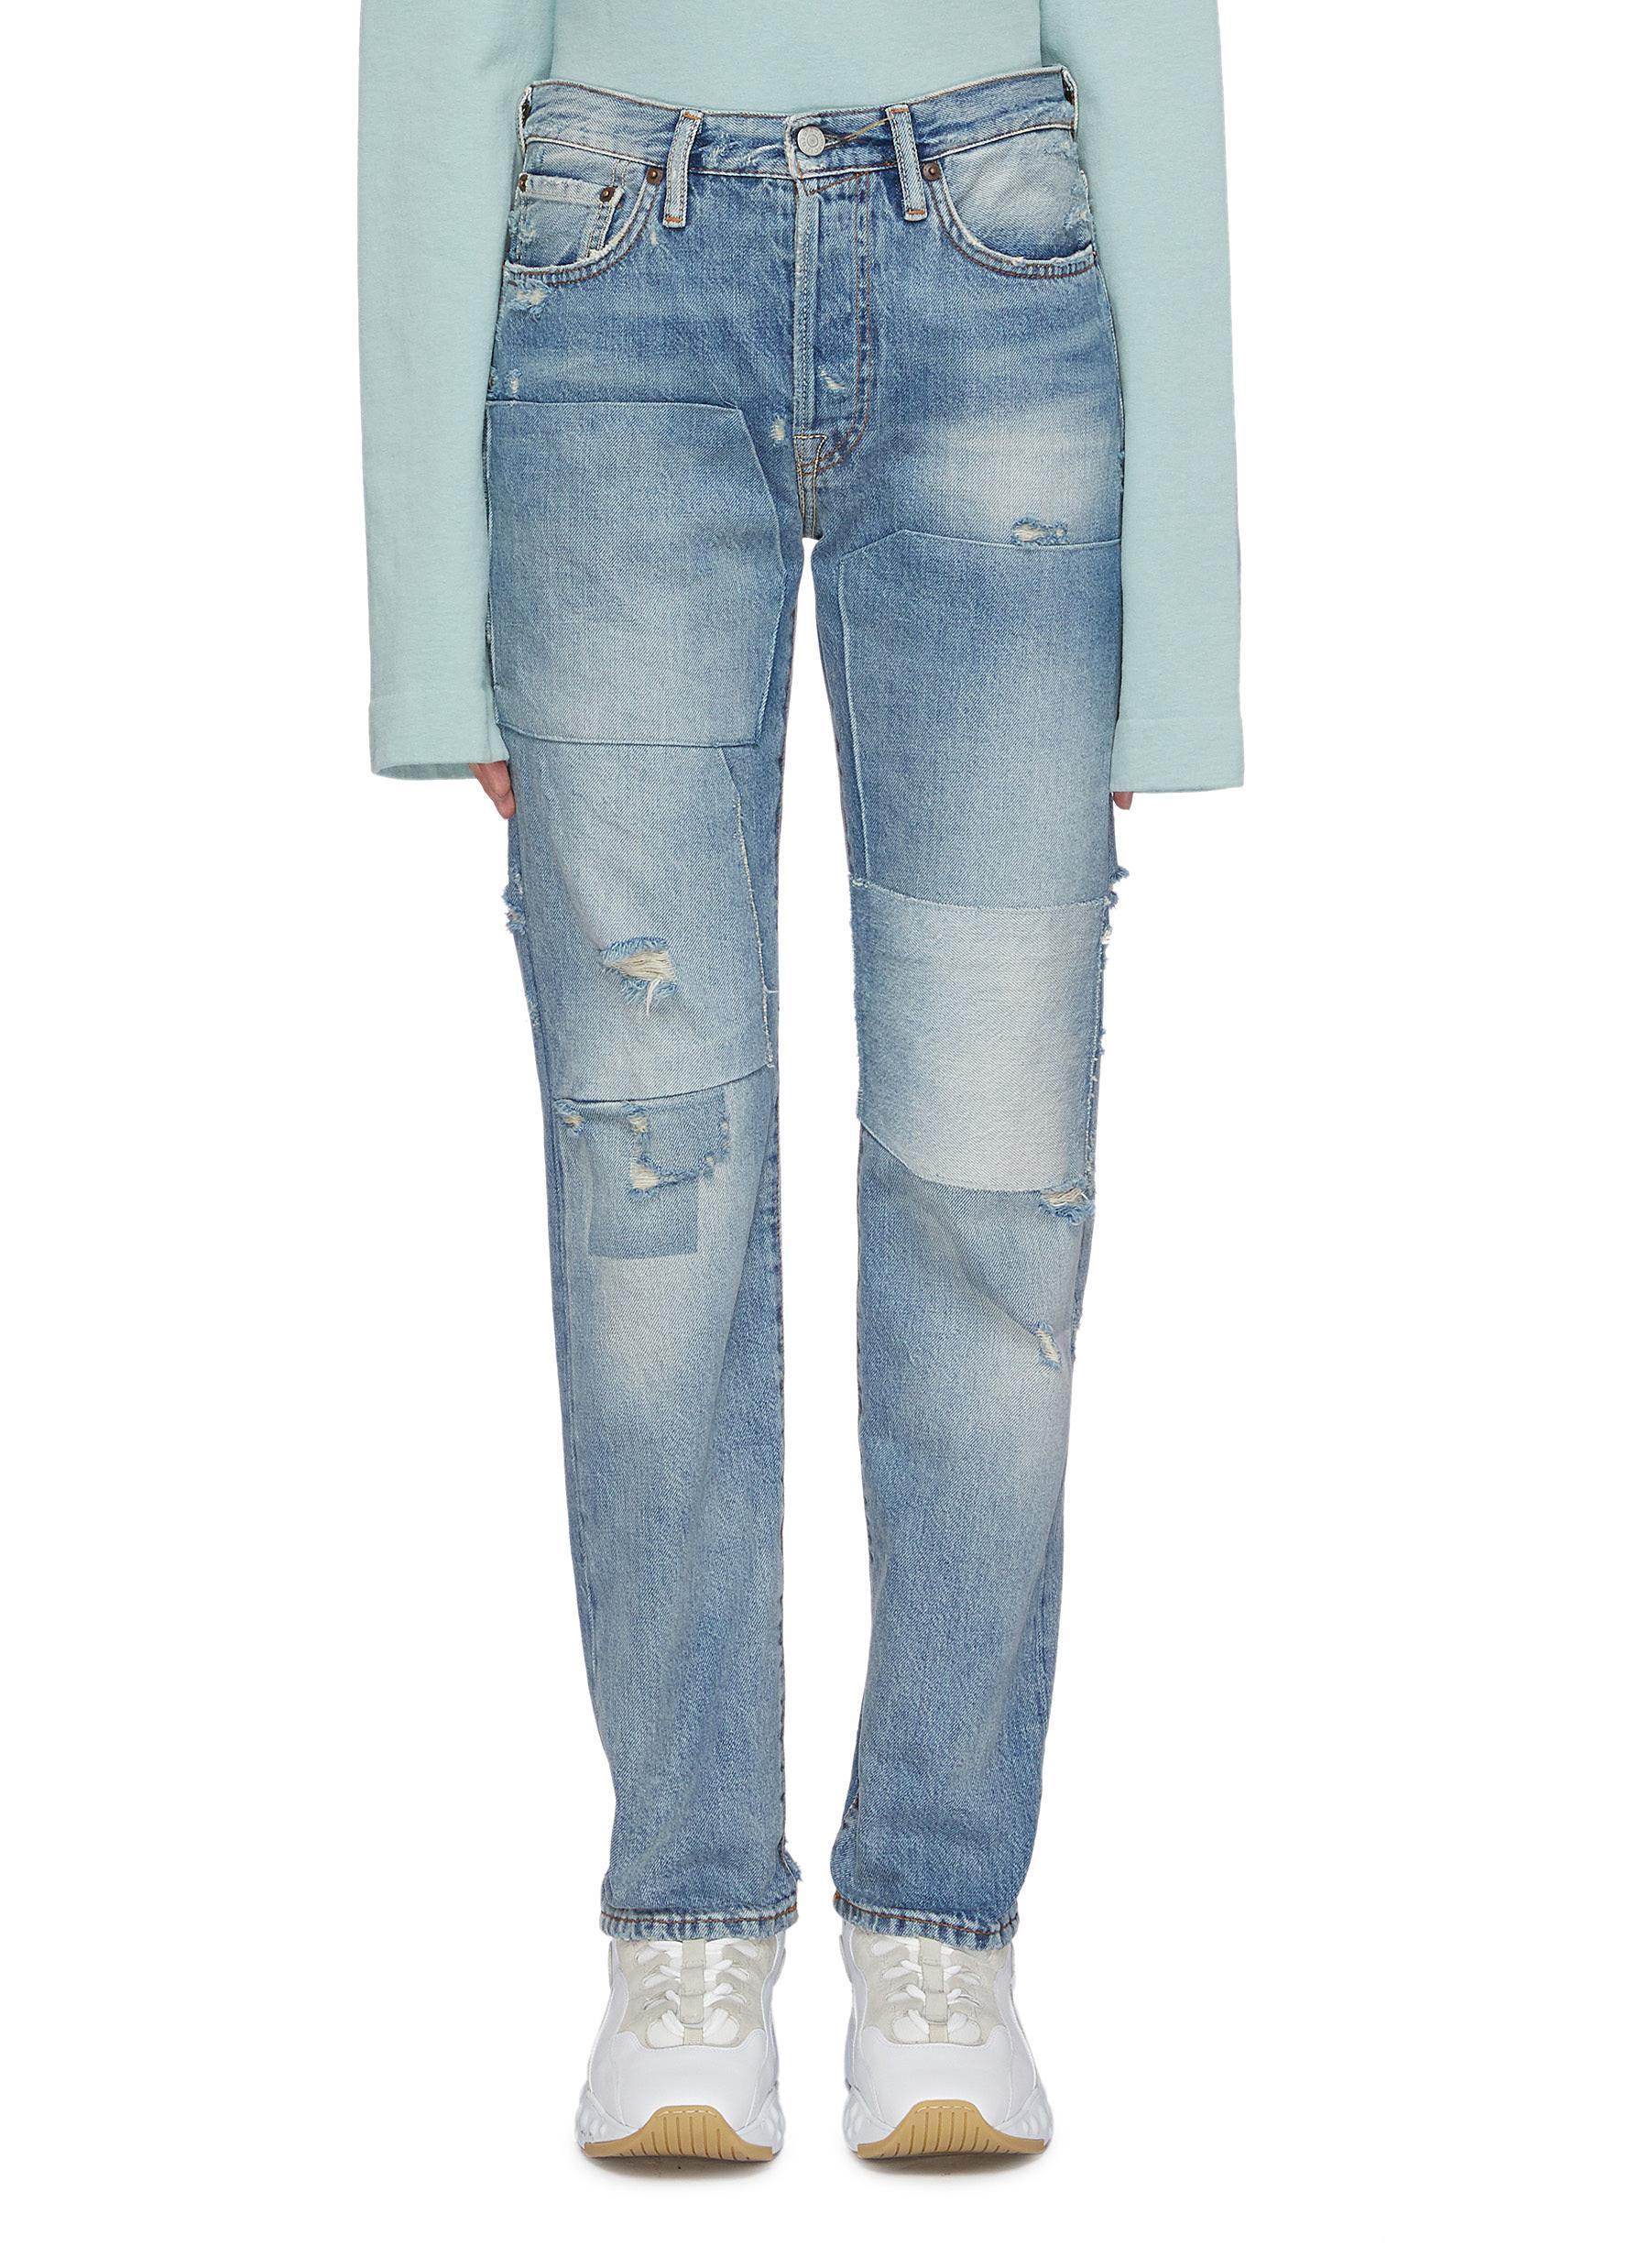 Acne Studios Patchwork Distressed Jeans in Blue | Lyst